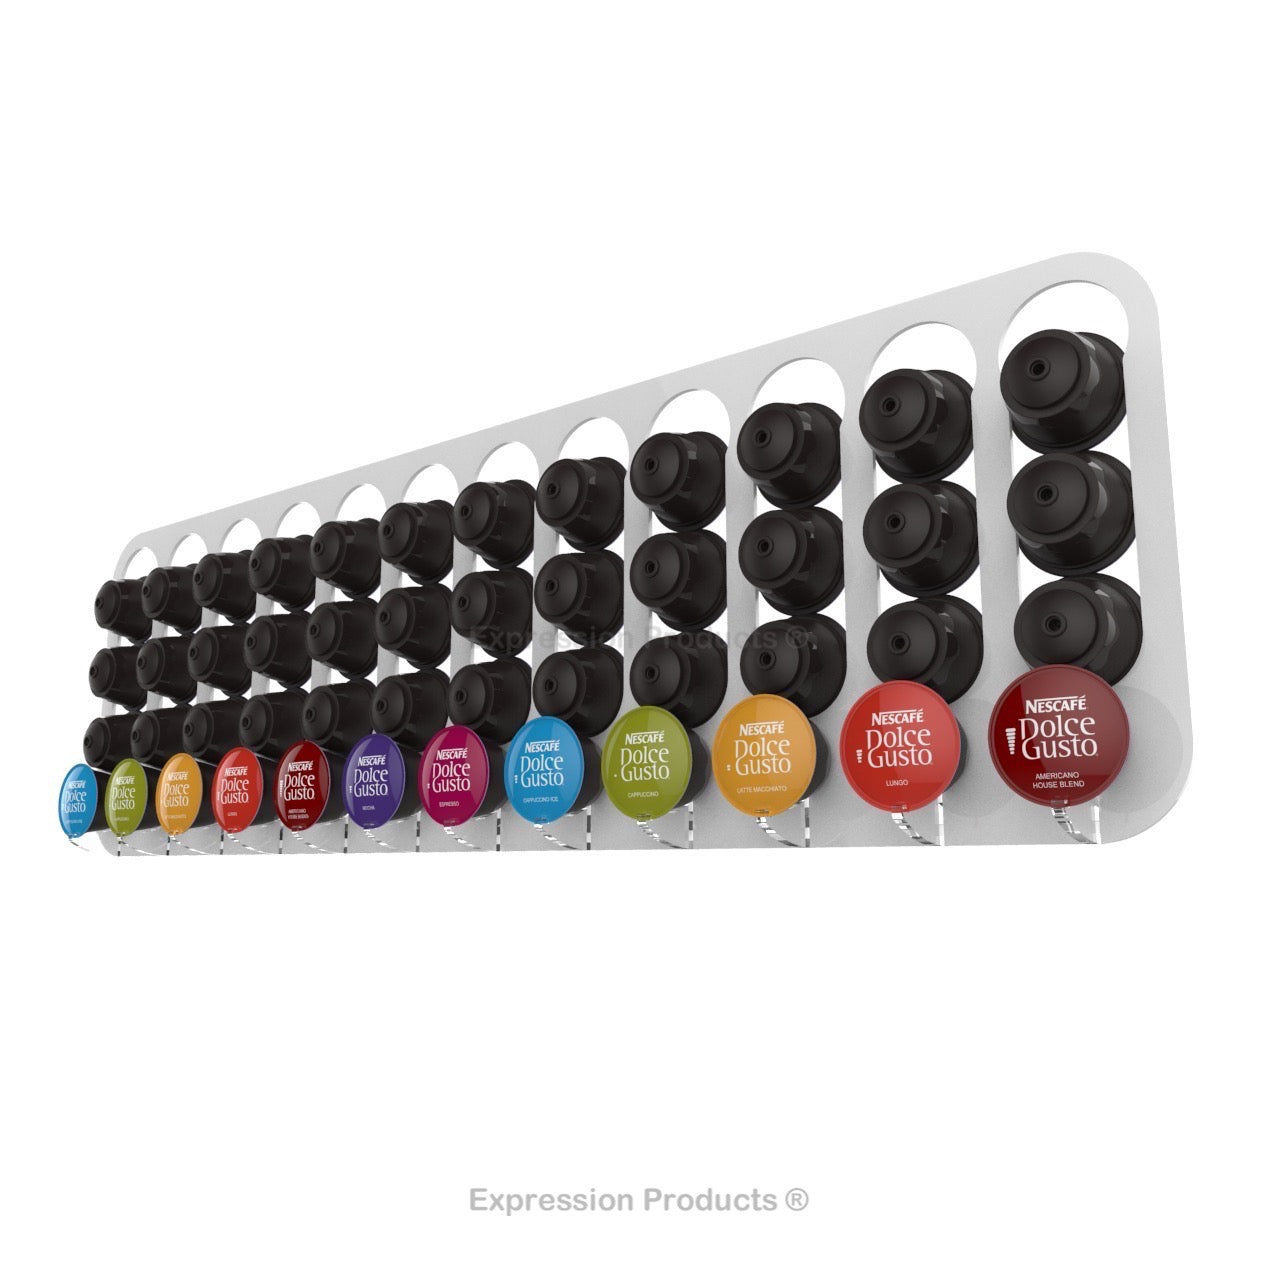 Dolce gusto coffee pod holder, wall mounted, half height.  Shown in white holding 48 pods